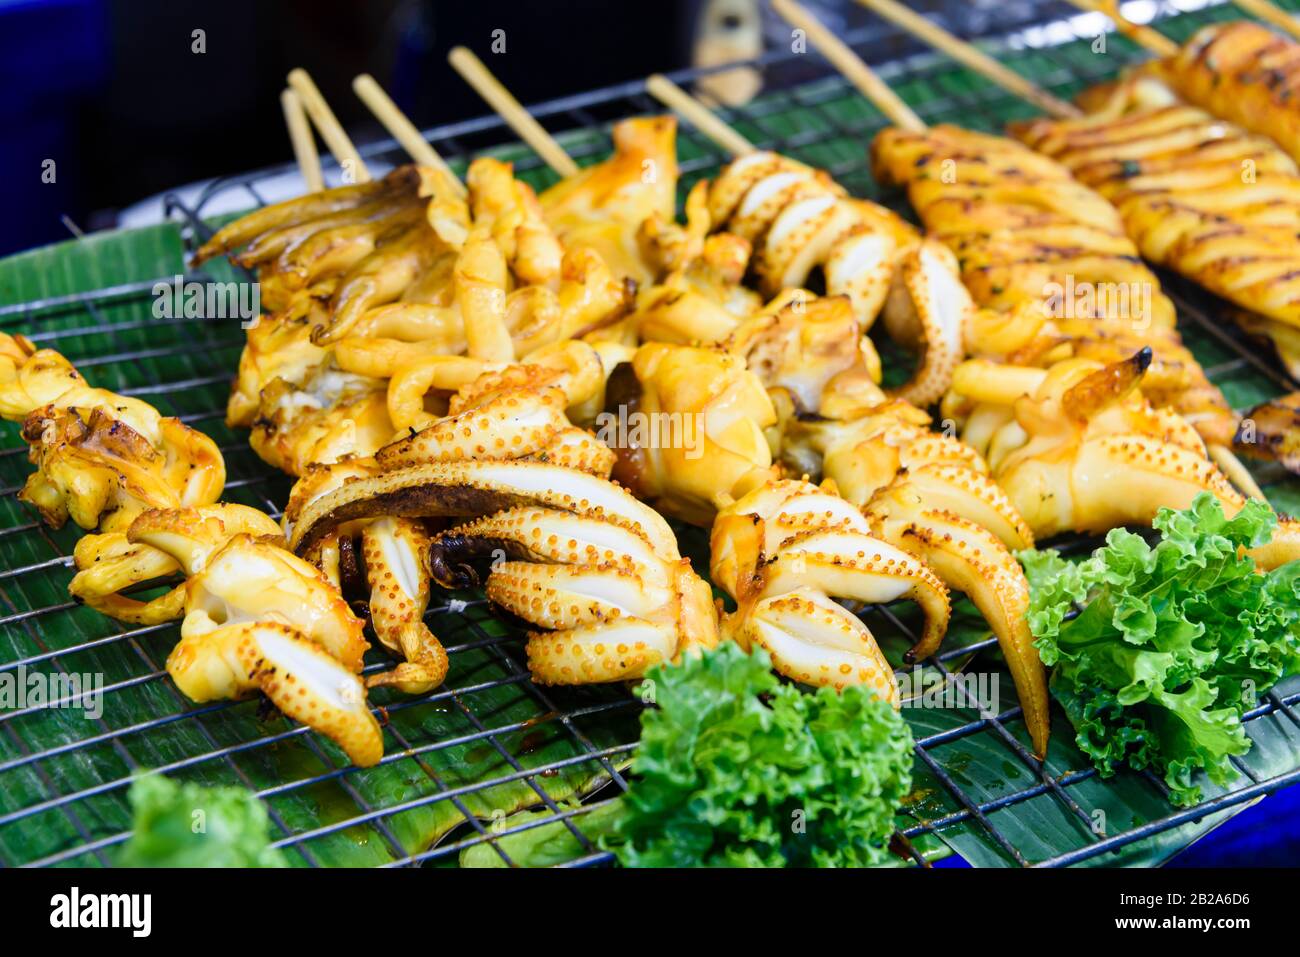 Skewers of port and chicken on sale at a street food stall, Bangkok, Thailand Stock Photo